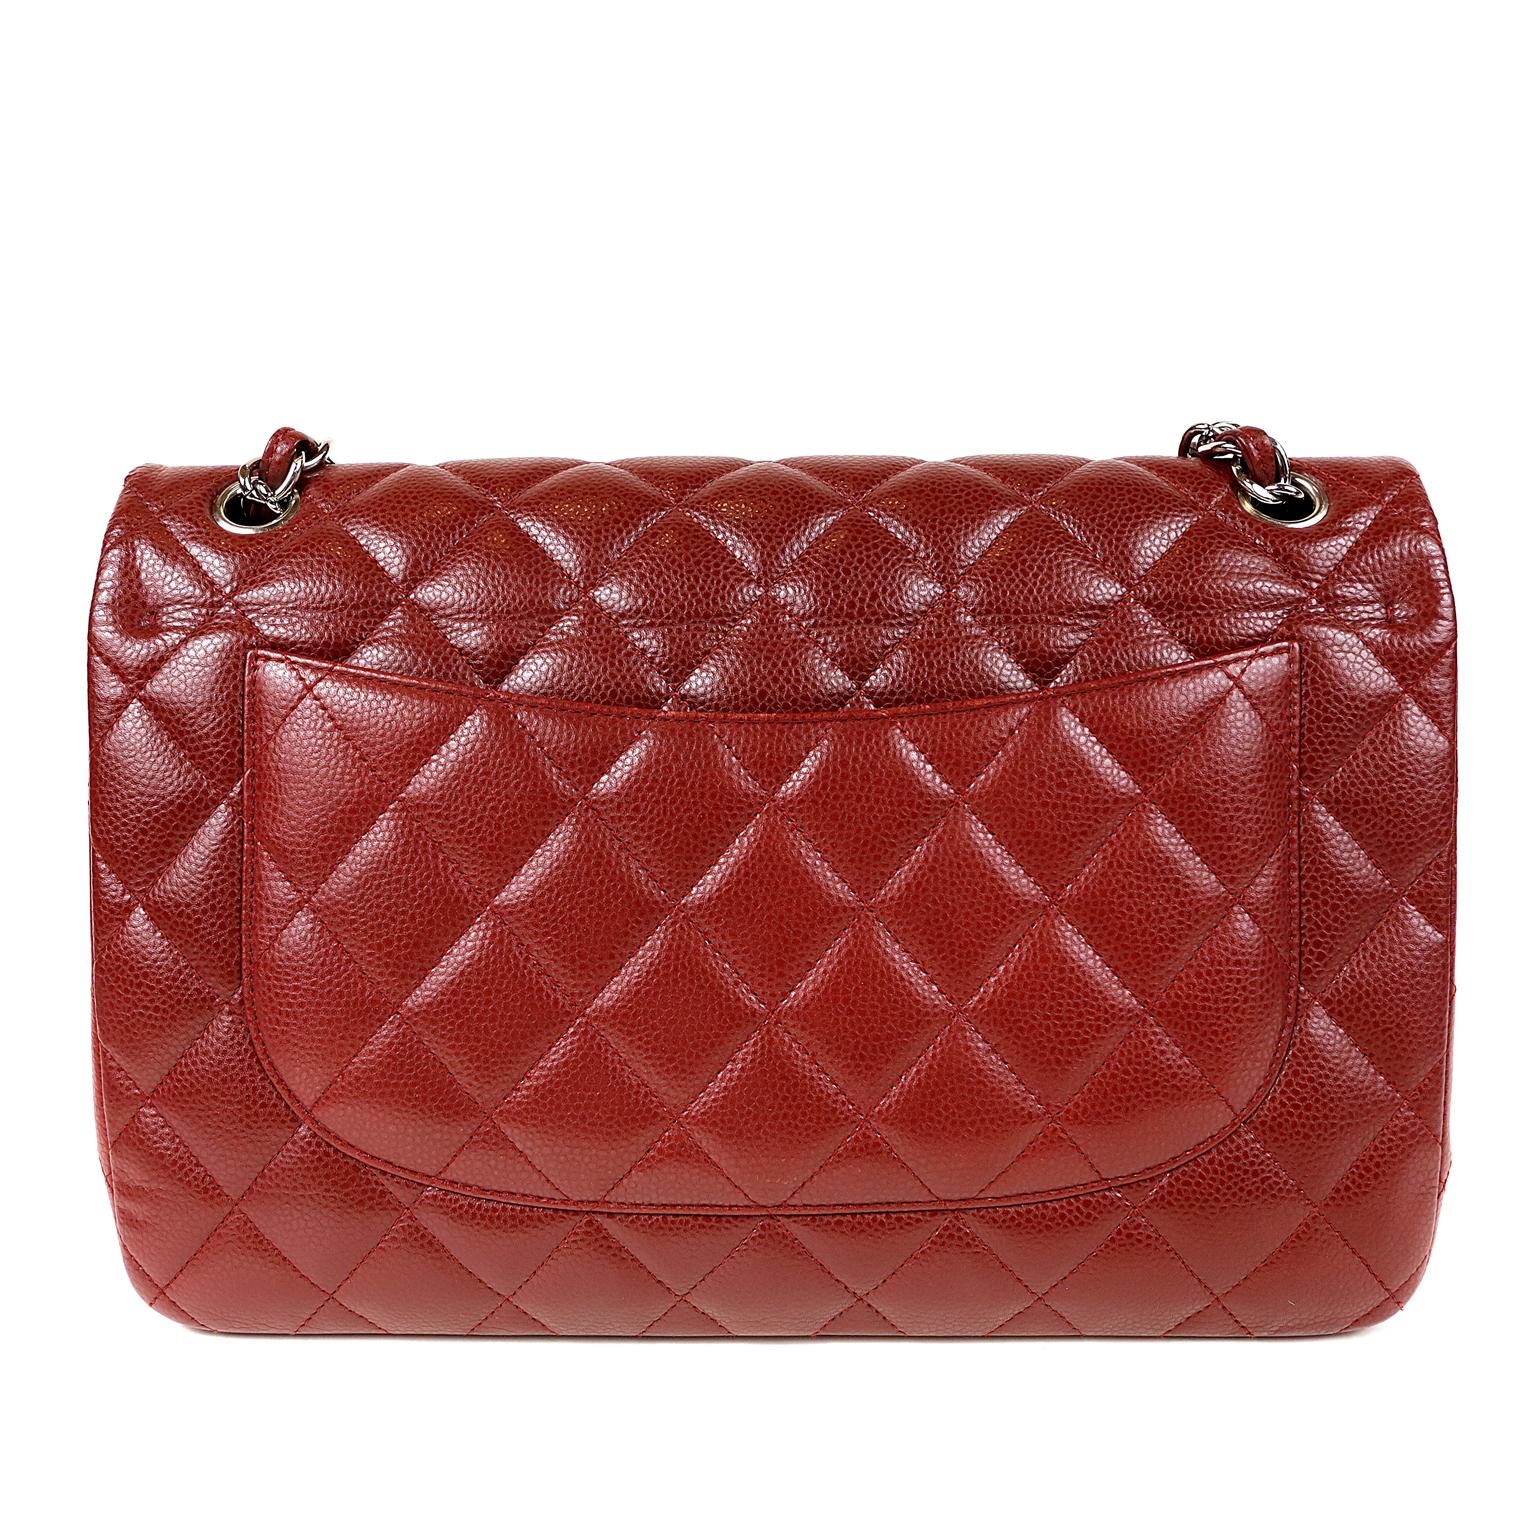 Chanel Red Caviar Jumbo Classic Double Flap Bag- Pristine; appears never carried
Particularly stunning in a deep red paired with silver hardware.  
Durable and textured dark red caviar leather is quilted in signature Chanel diamond pattern.  Silver